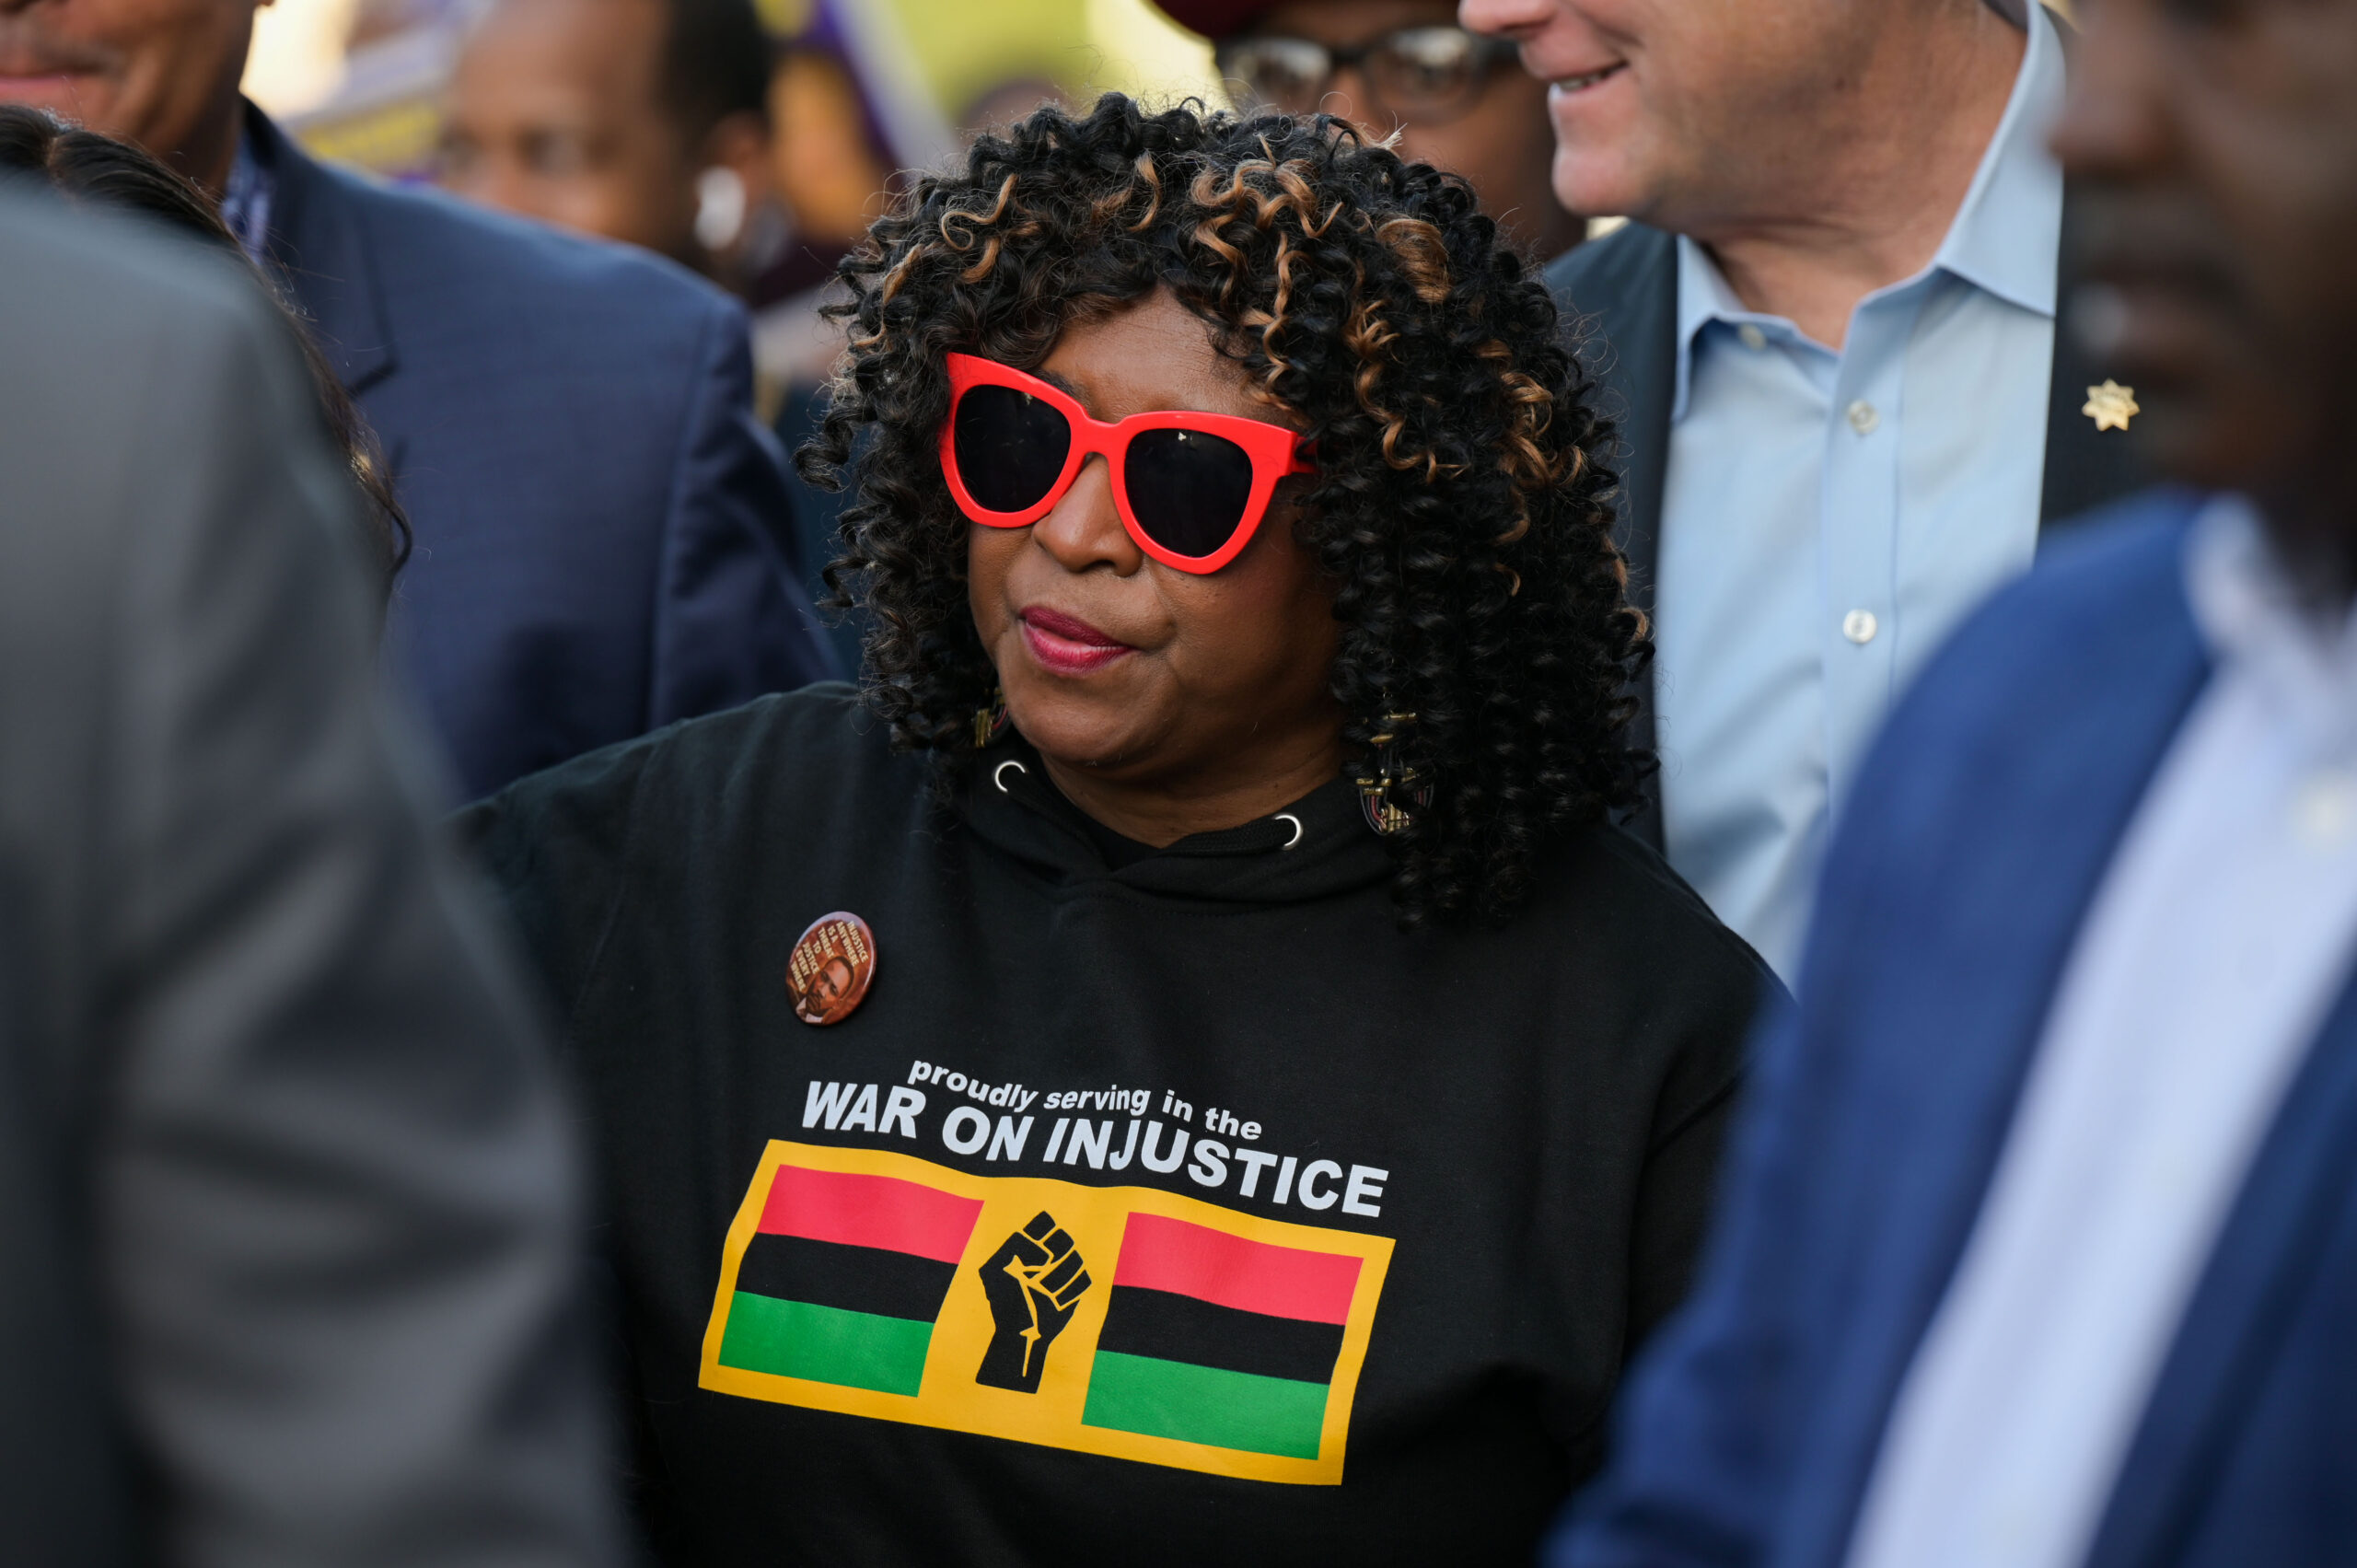 A person with red glasses, curly hair, wearing a "War on Injustice" shirt, stands among others in a gathering.